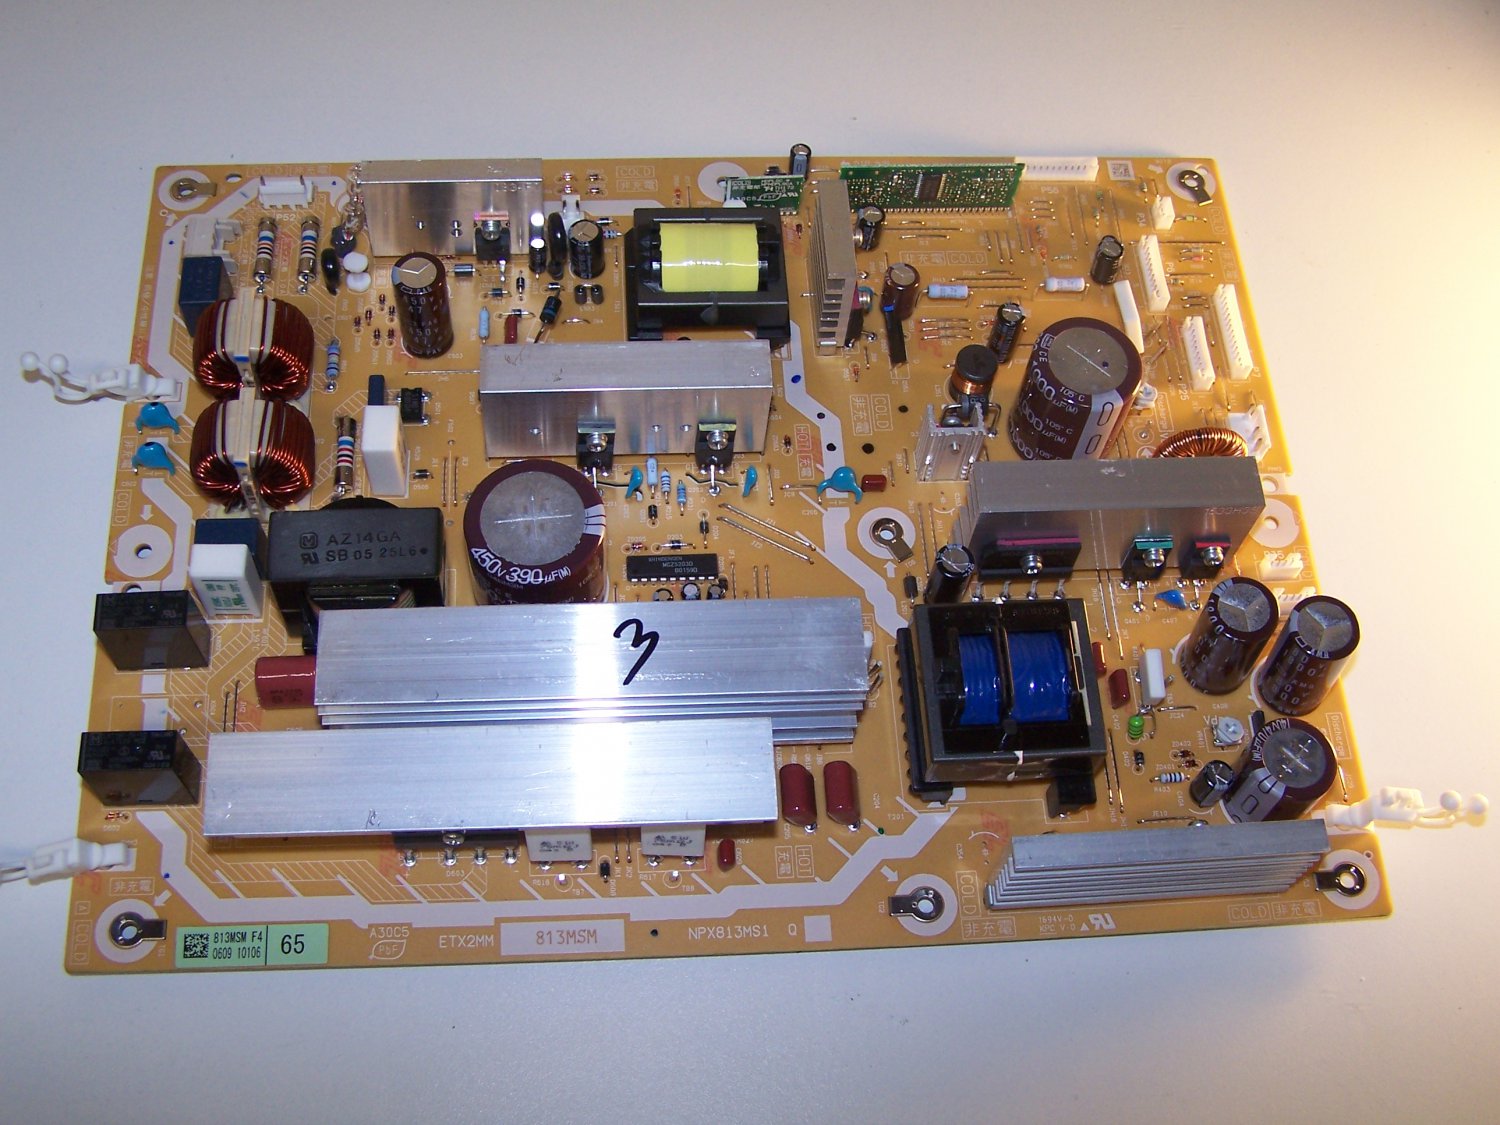 ETX2MM813MSM POWER SUPPLY FOR MODEL # TCP65S2